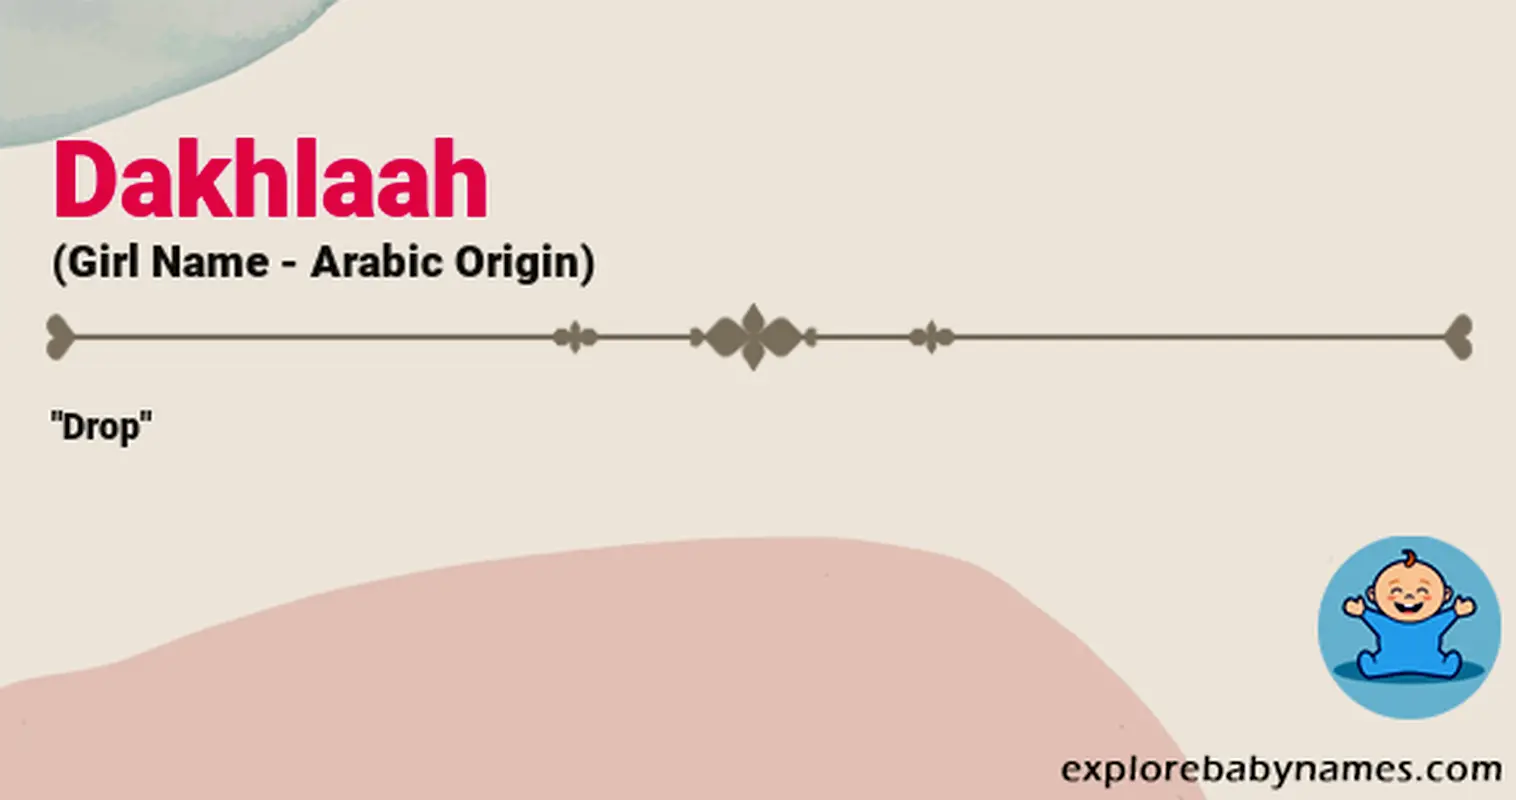 Meaning of Dakhlaah